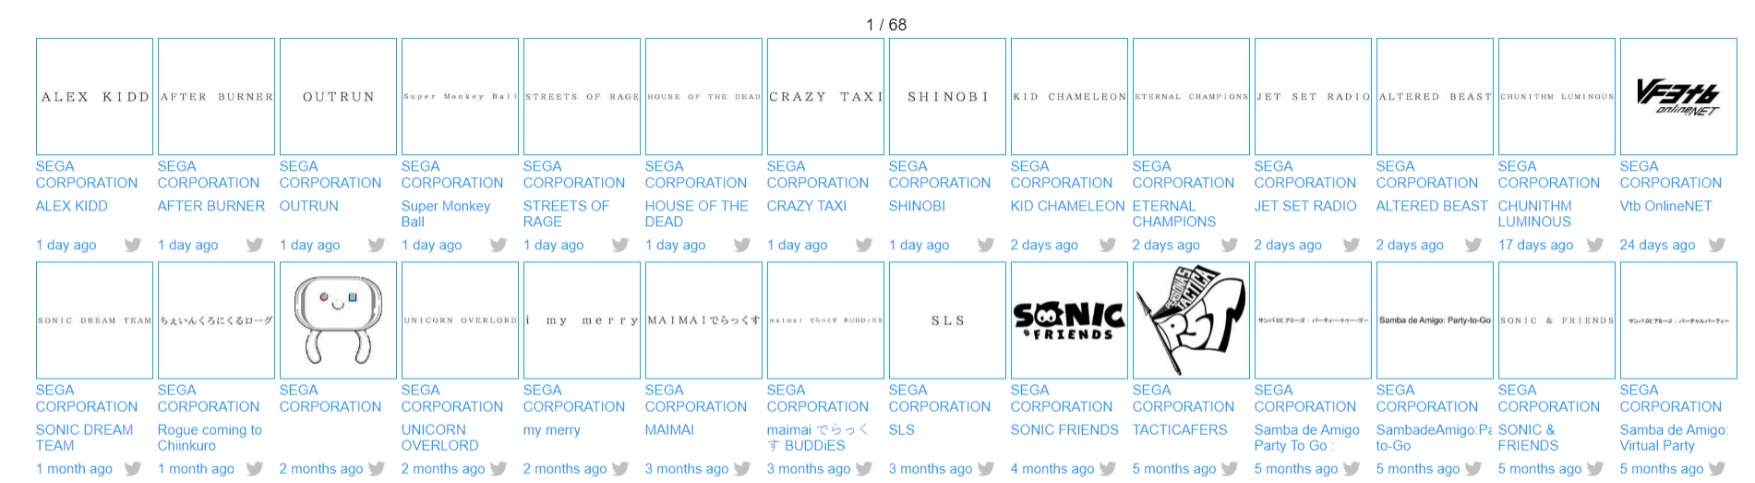 Sega has filed trademarks for over eight IPs in the last few days.